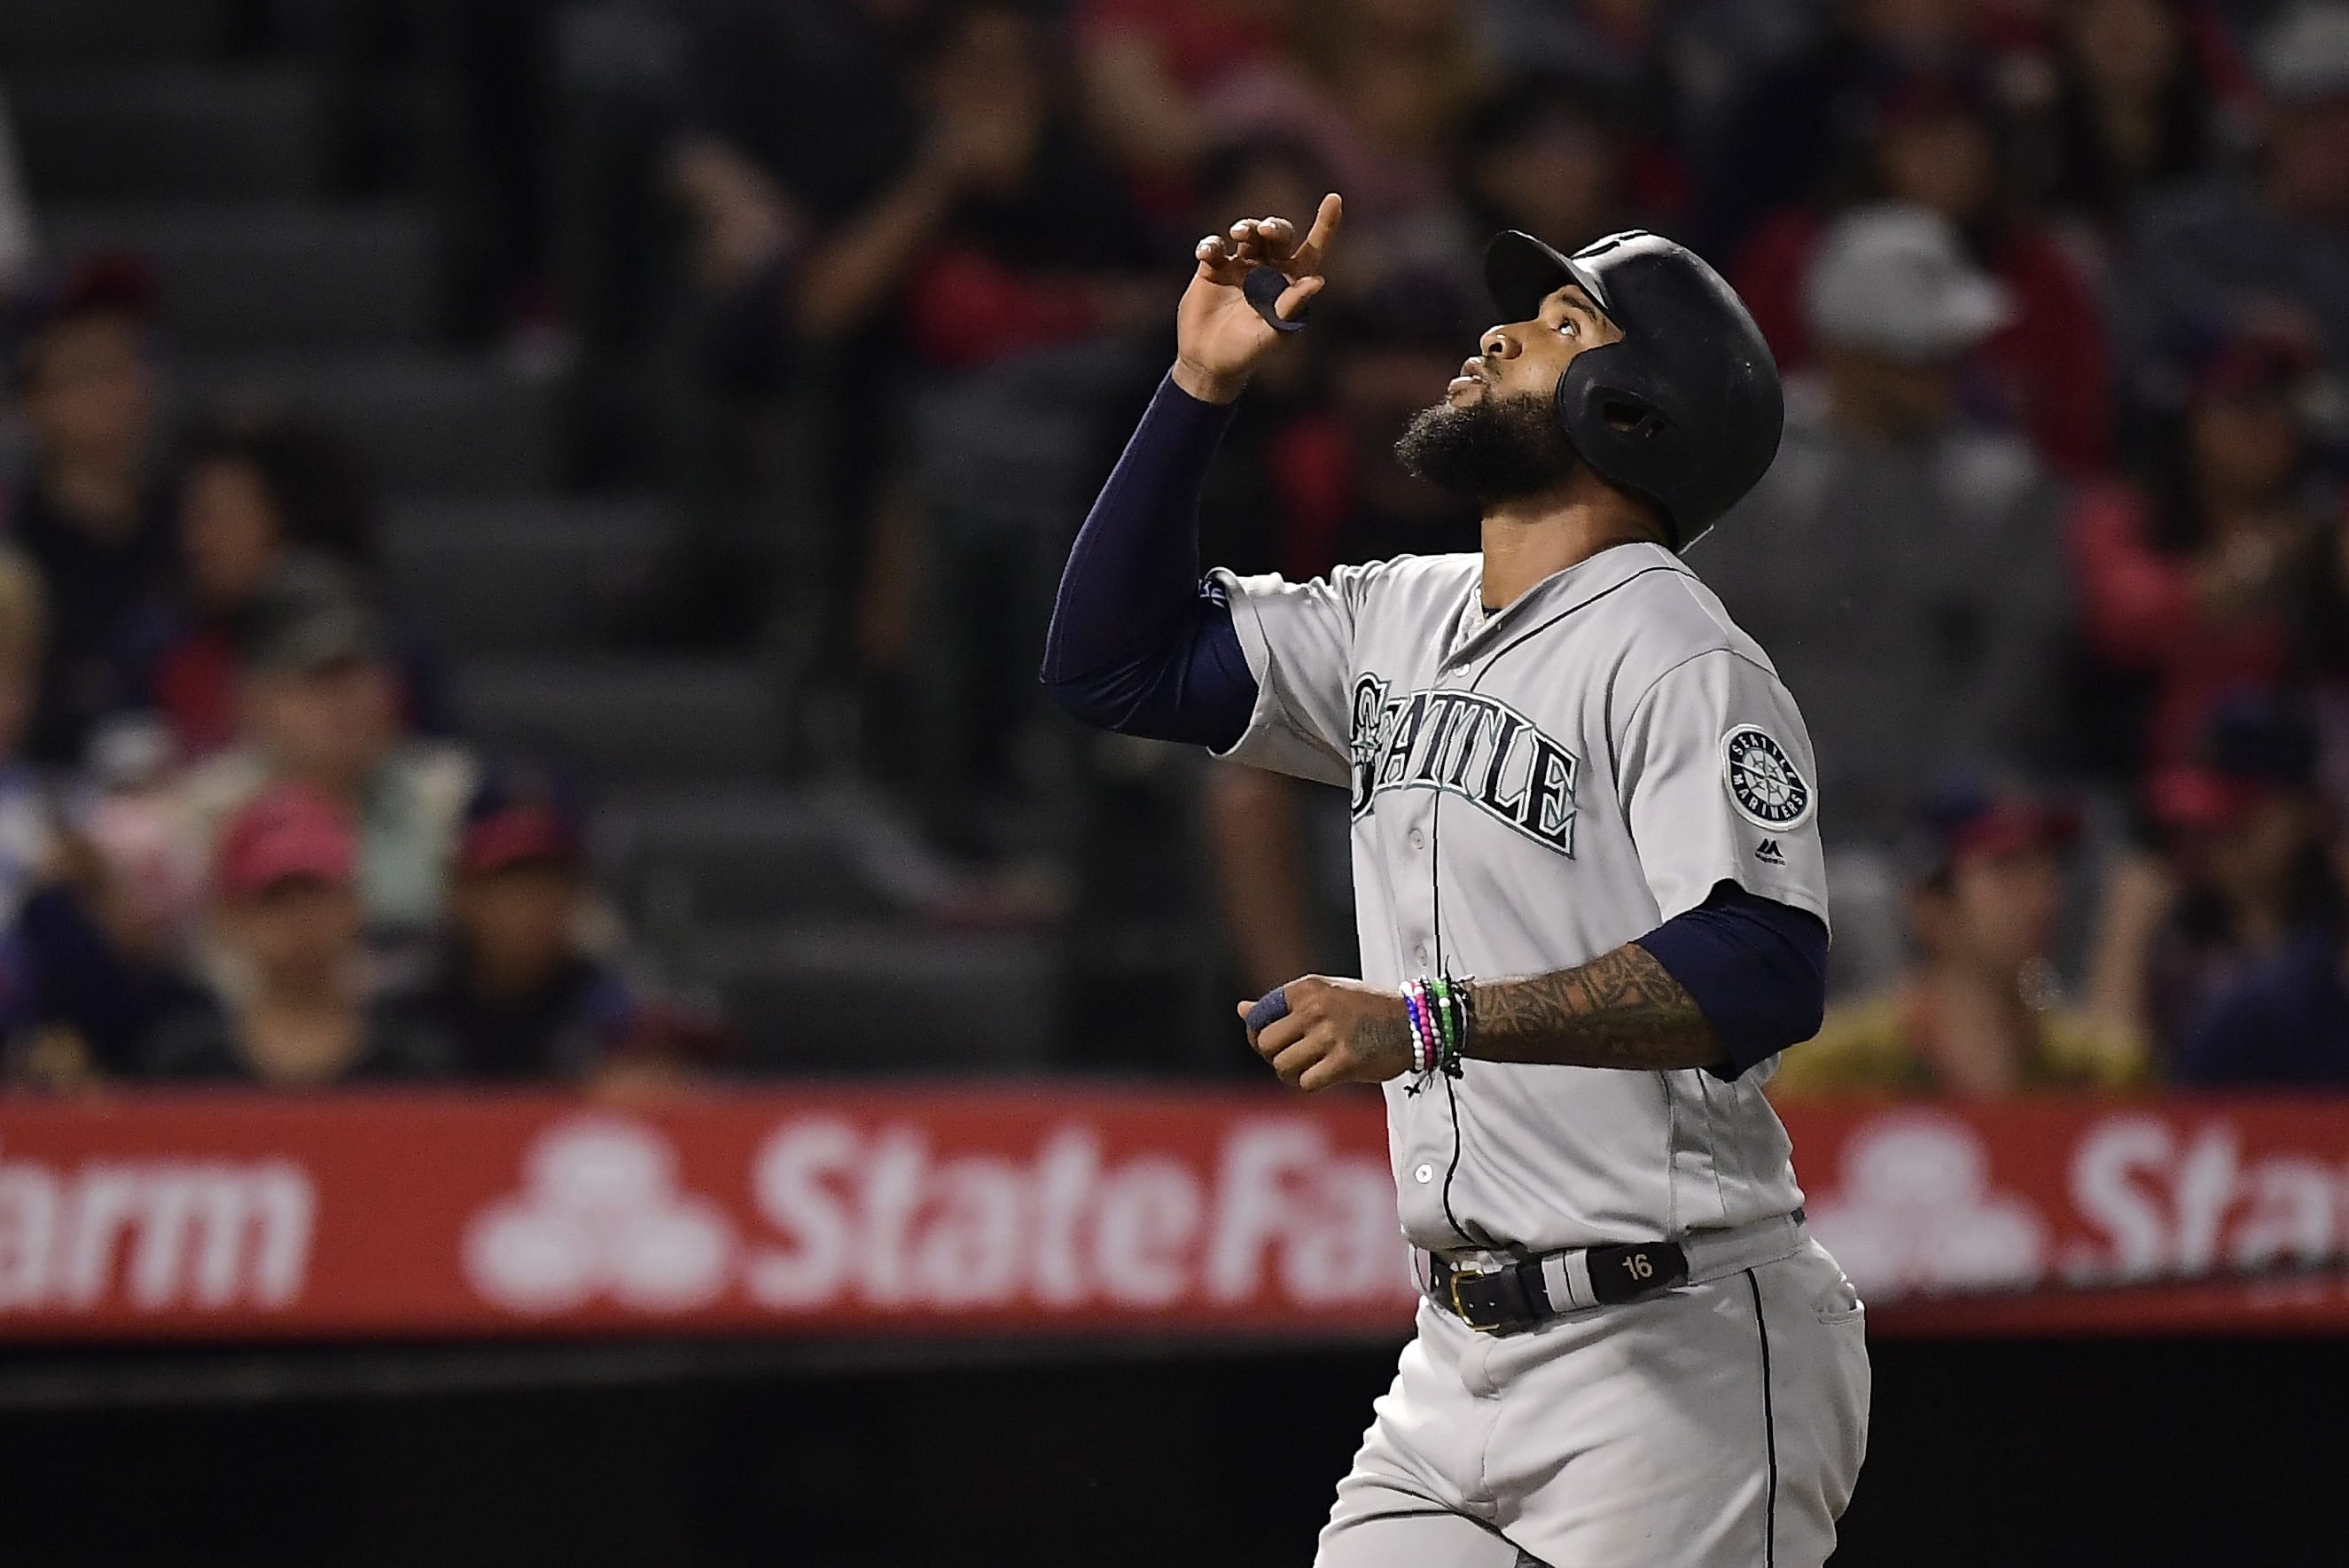 Seattle Mariners' Domingo Santana gestures as he scores after hitting a solo home run during the fifth inning of the team's baseball game against the Los Angeles Angels on Friday, June 7, 2019, in Anaheim, Calif. (AP Photo/Mark J.